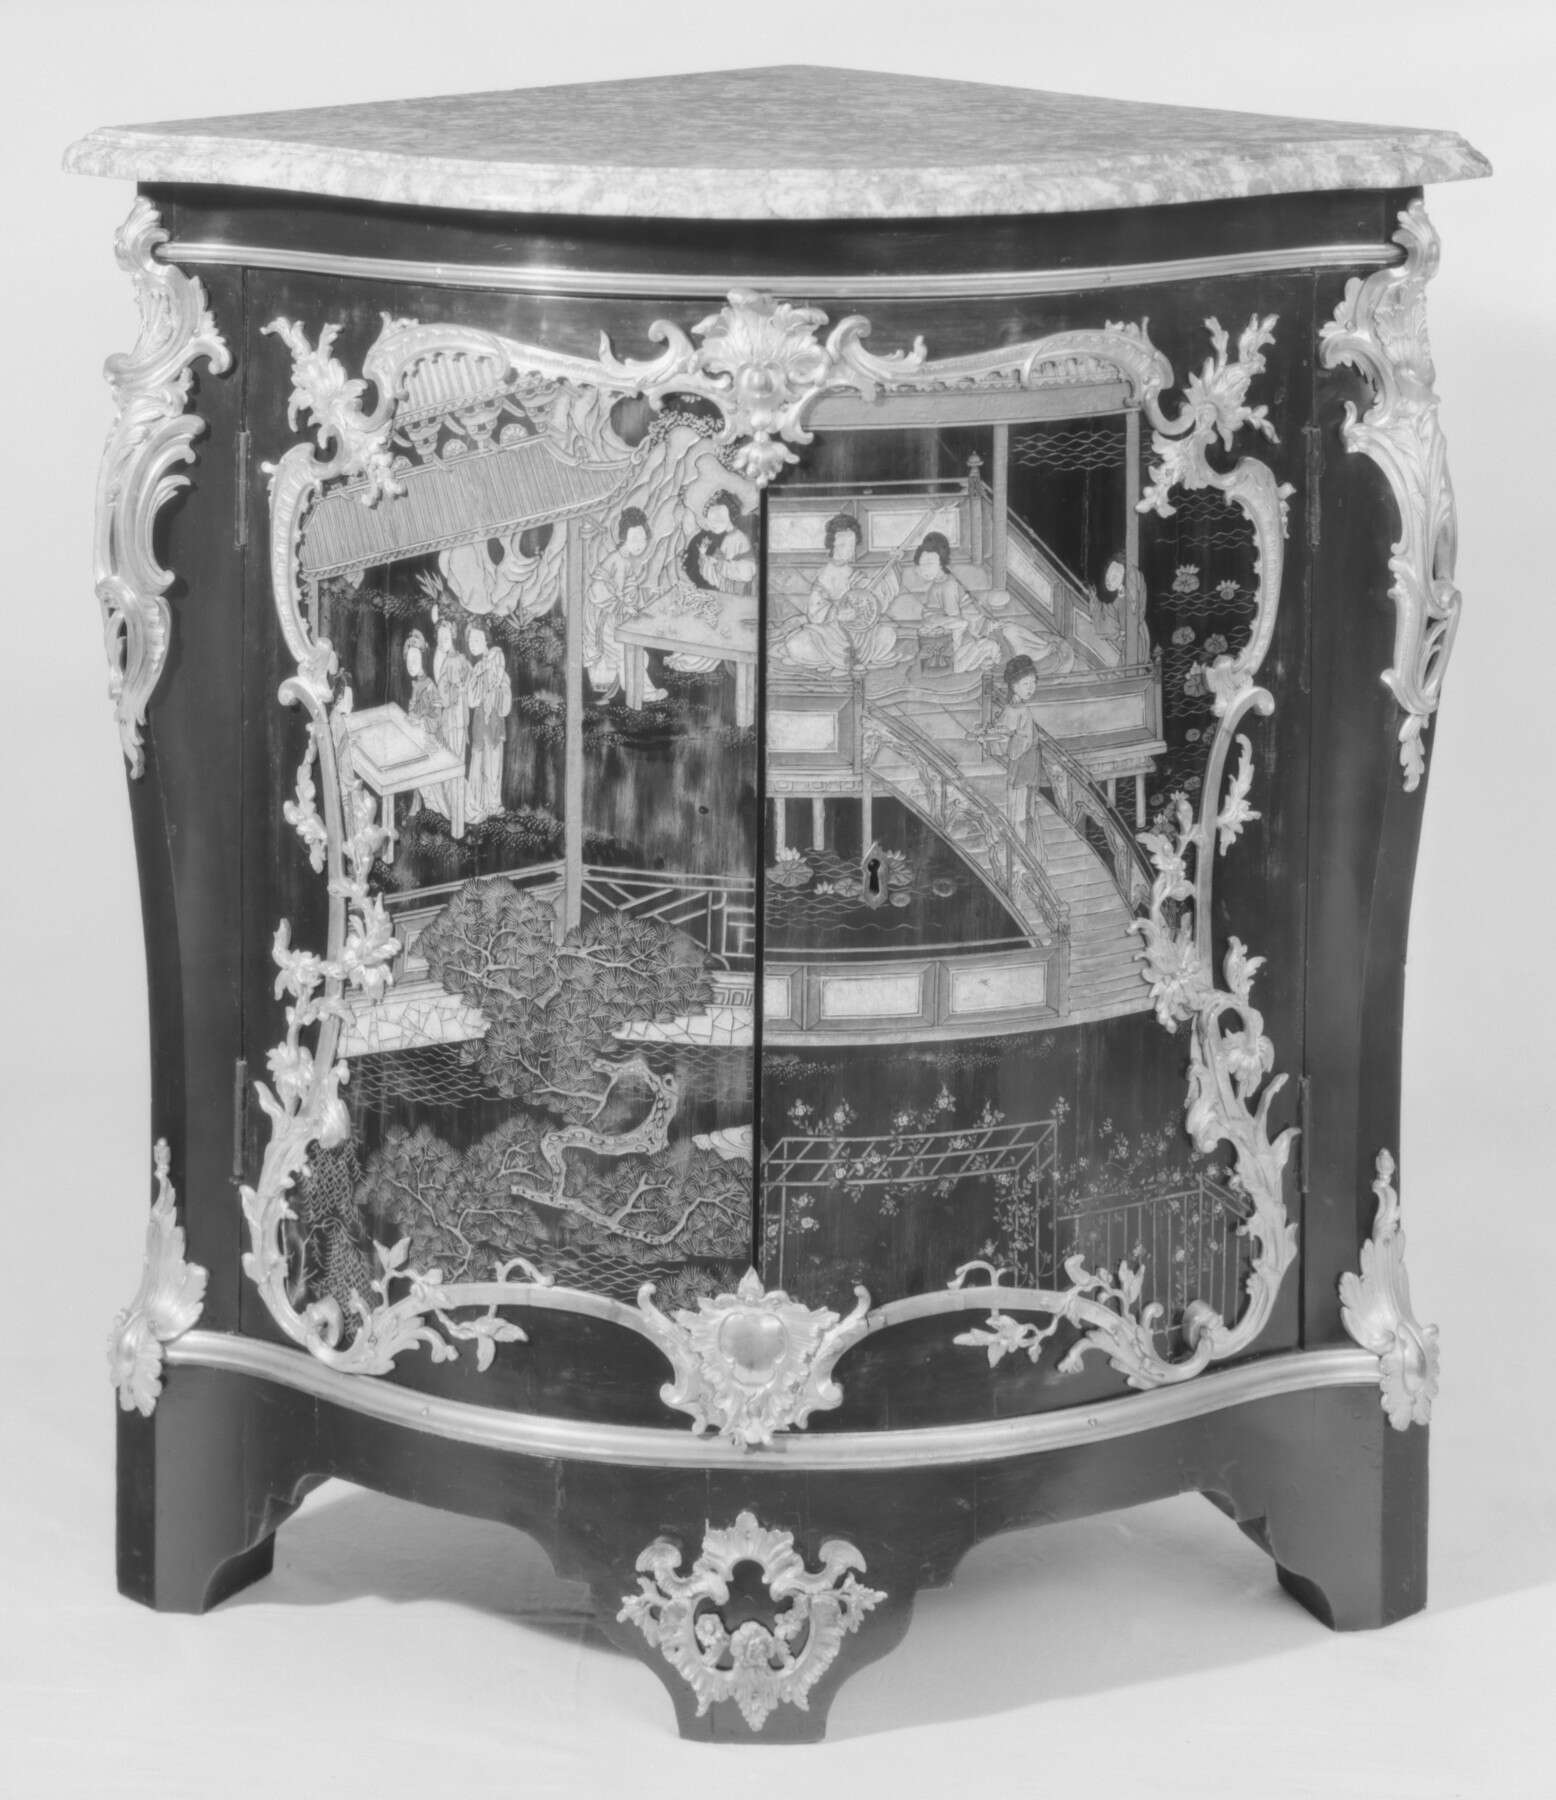 black and white image of another corner cabinet decorated with elaborate Asian imagery showing a domestic interior with women and gardens